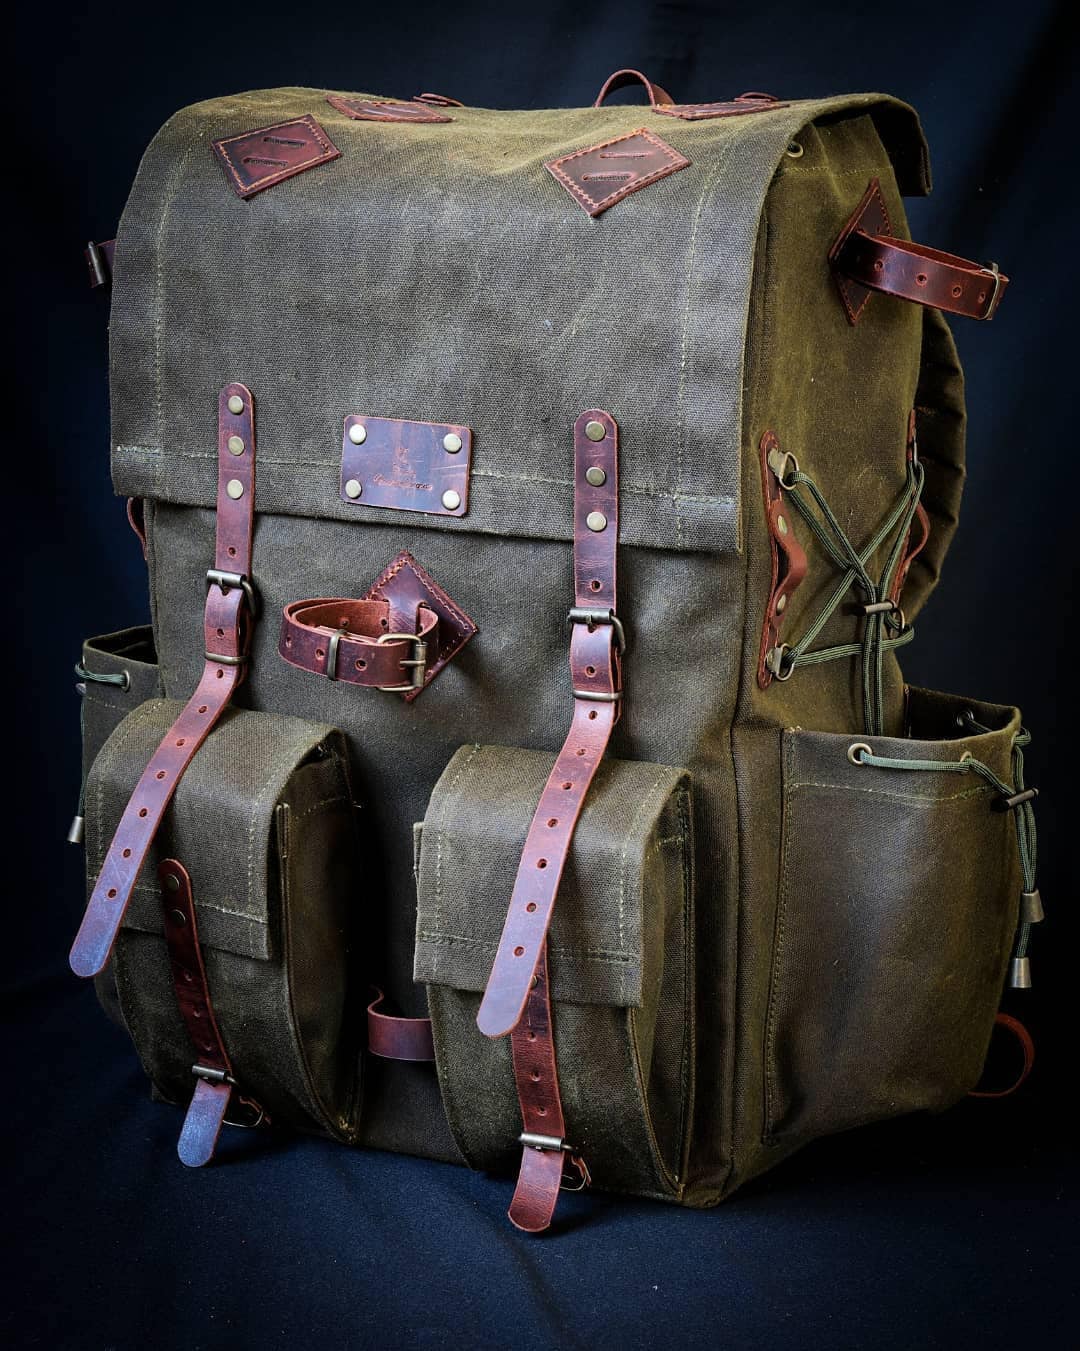 Handmade Leather, Waxed Canvas Backpack for Travel, Camping, Hunting, Bushcraft | 50 Liter | Green, Khaki, Brown Options | Personalization bushcraft - camping - hiking backpack 99percenthandmade   